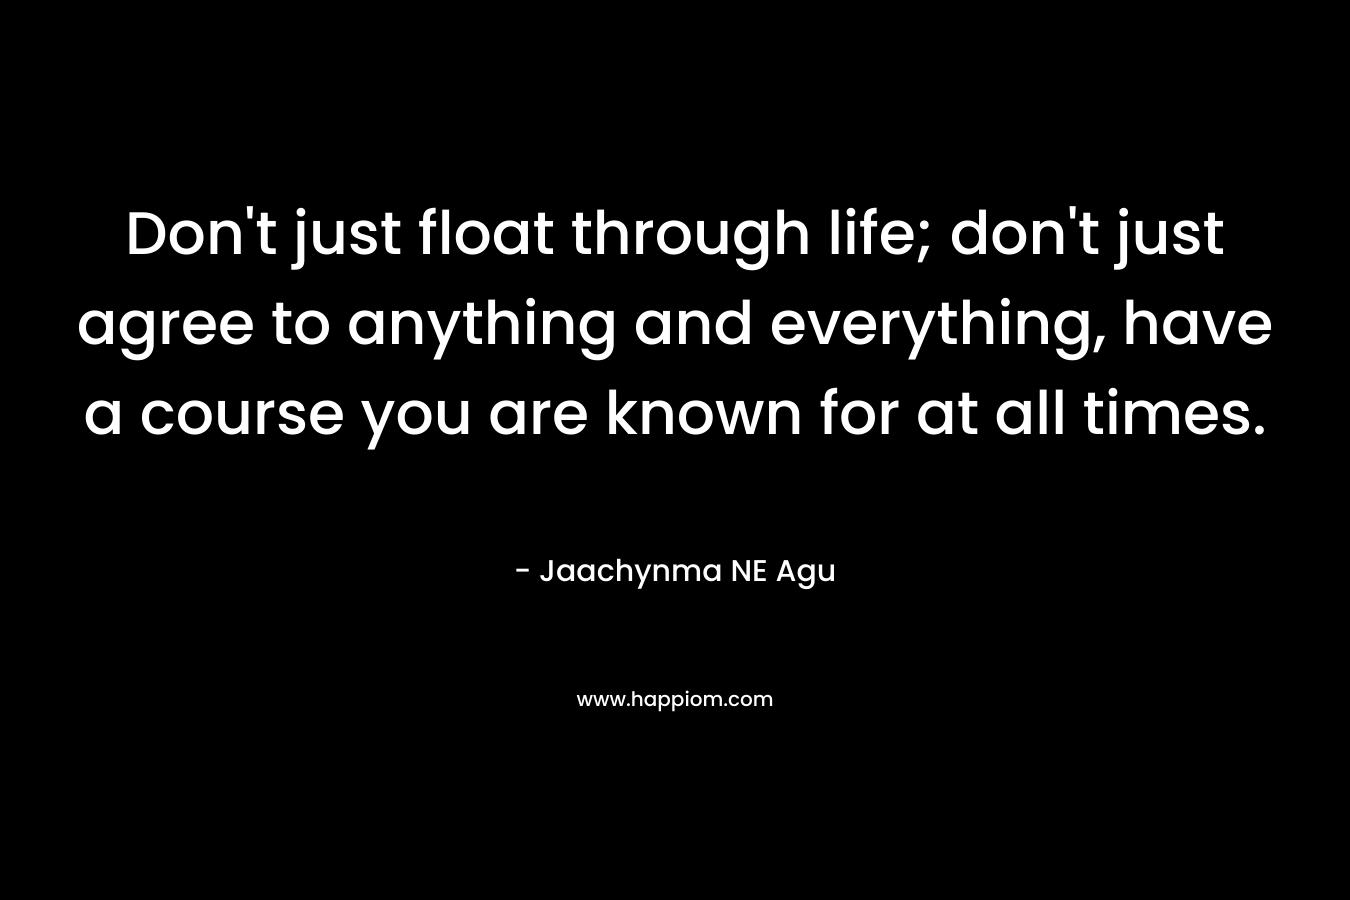 Don't just float through life; don't just agree to anything and everything, have a course you are known for at all times.